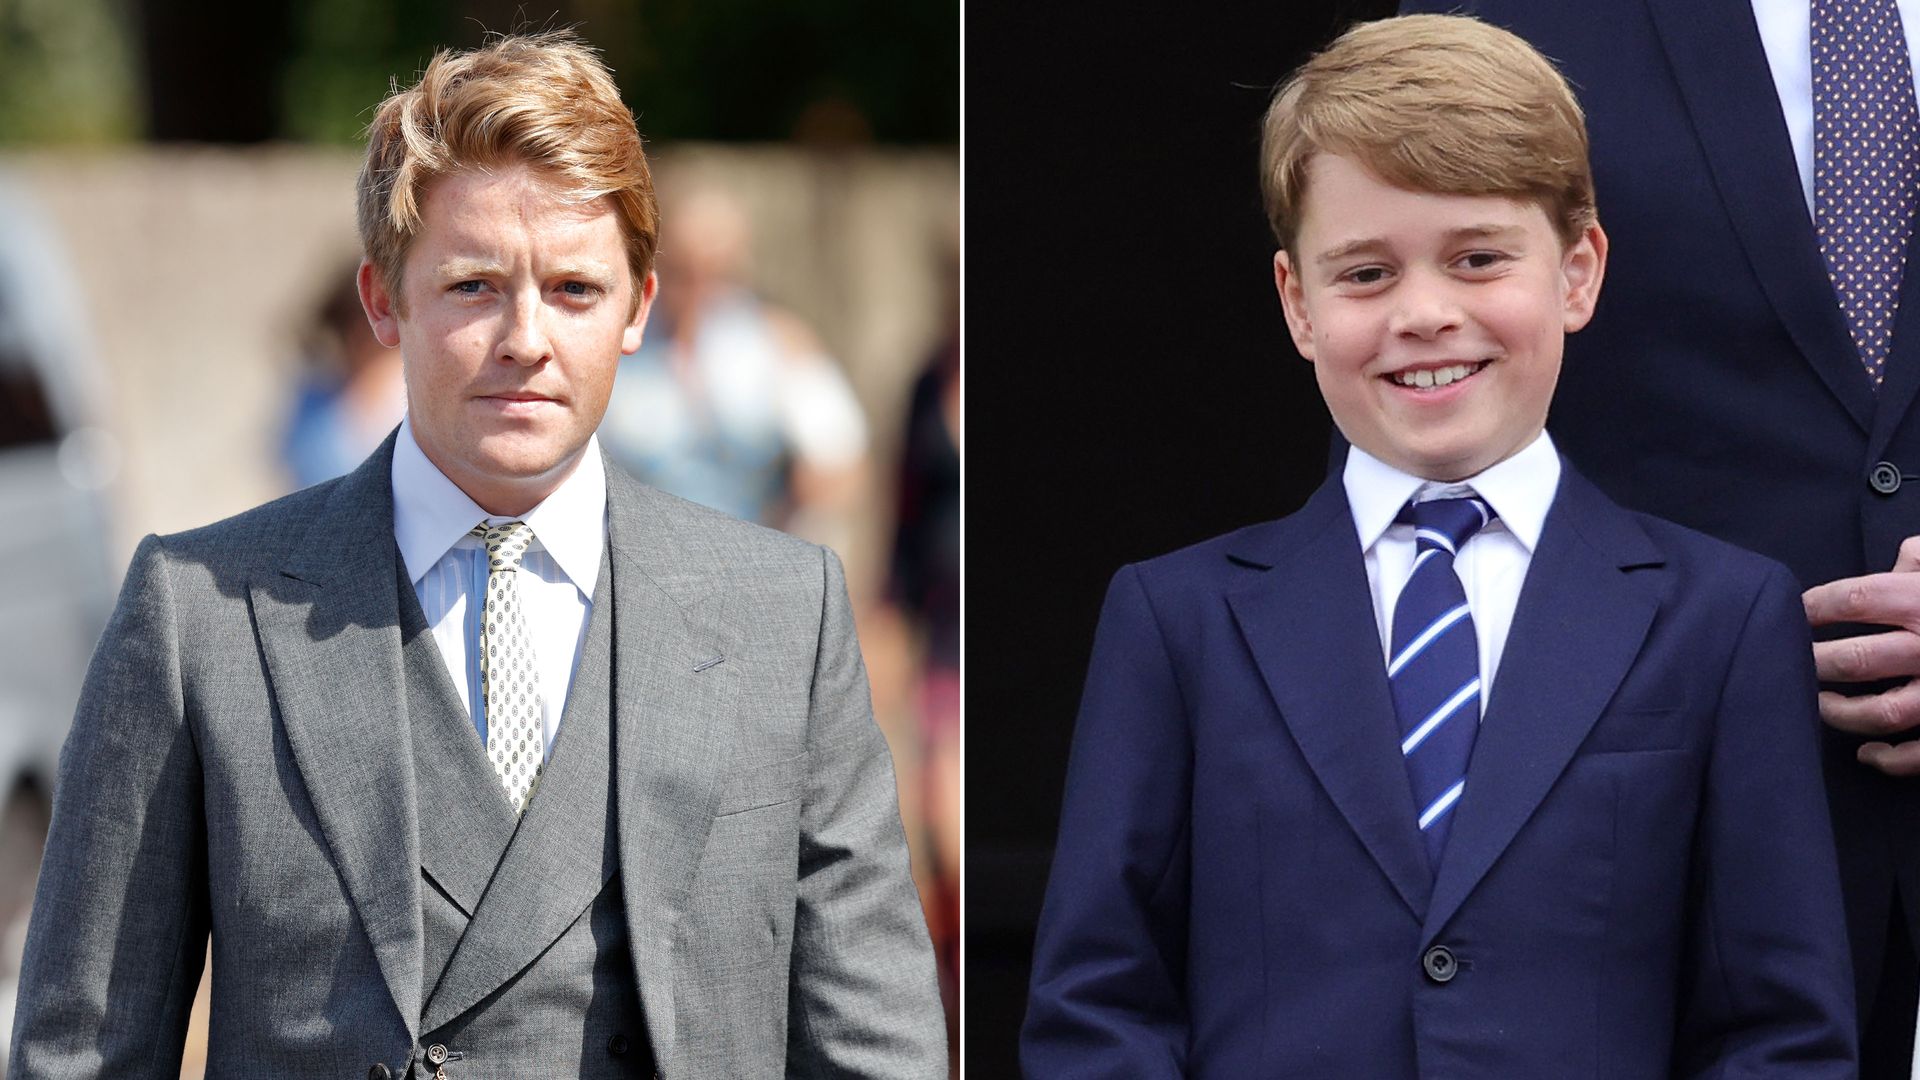 Why the Duke of Westminster's godson Prince George is not attending his wedding